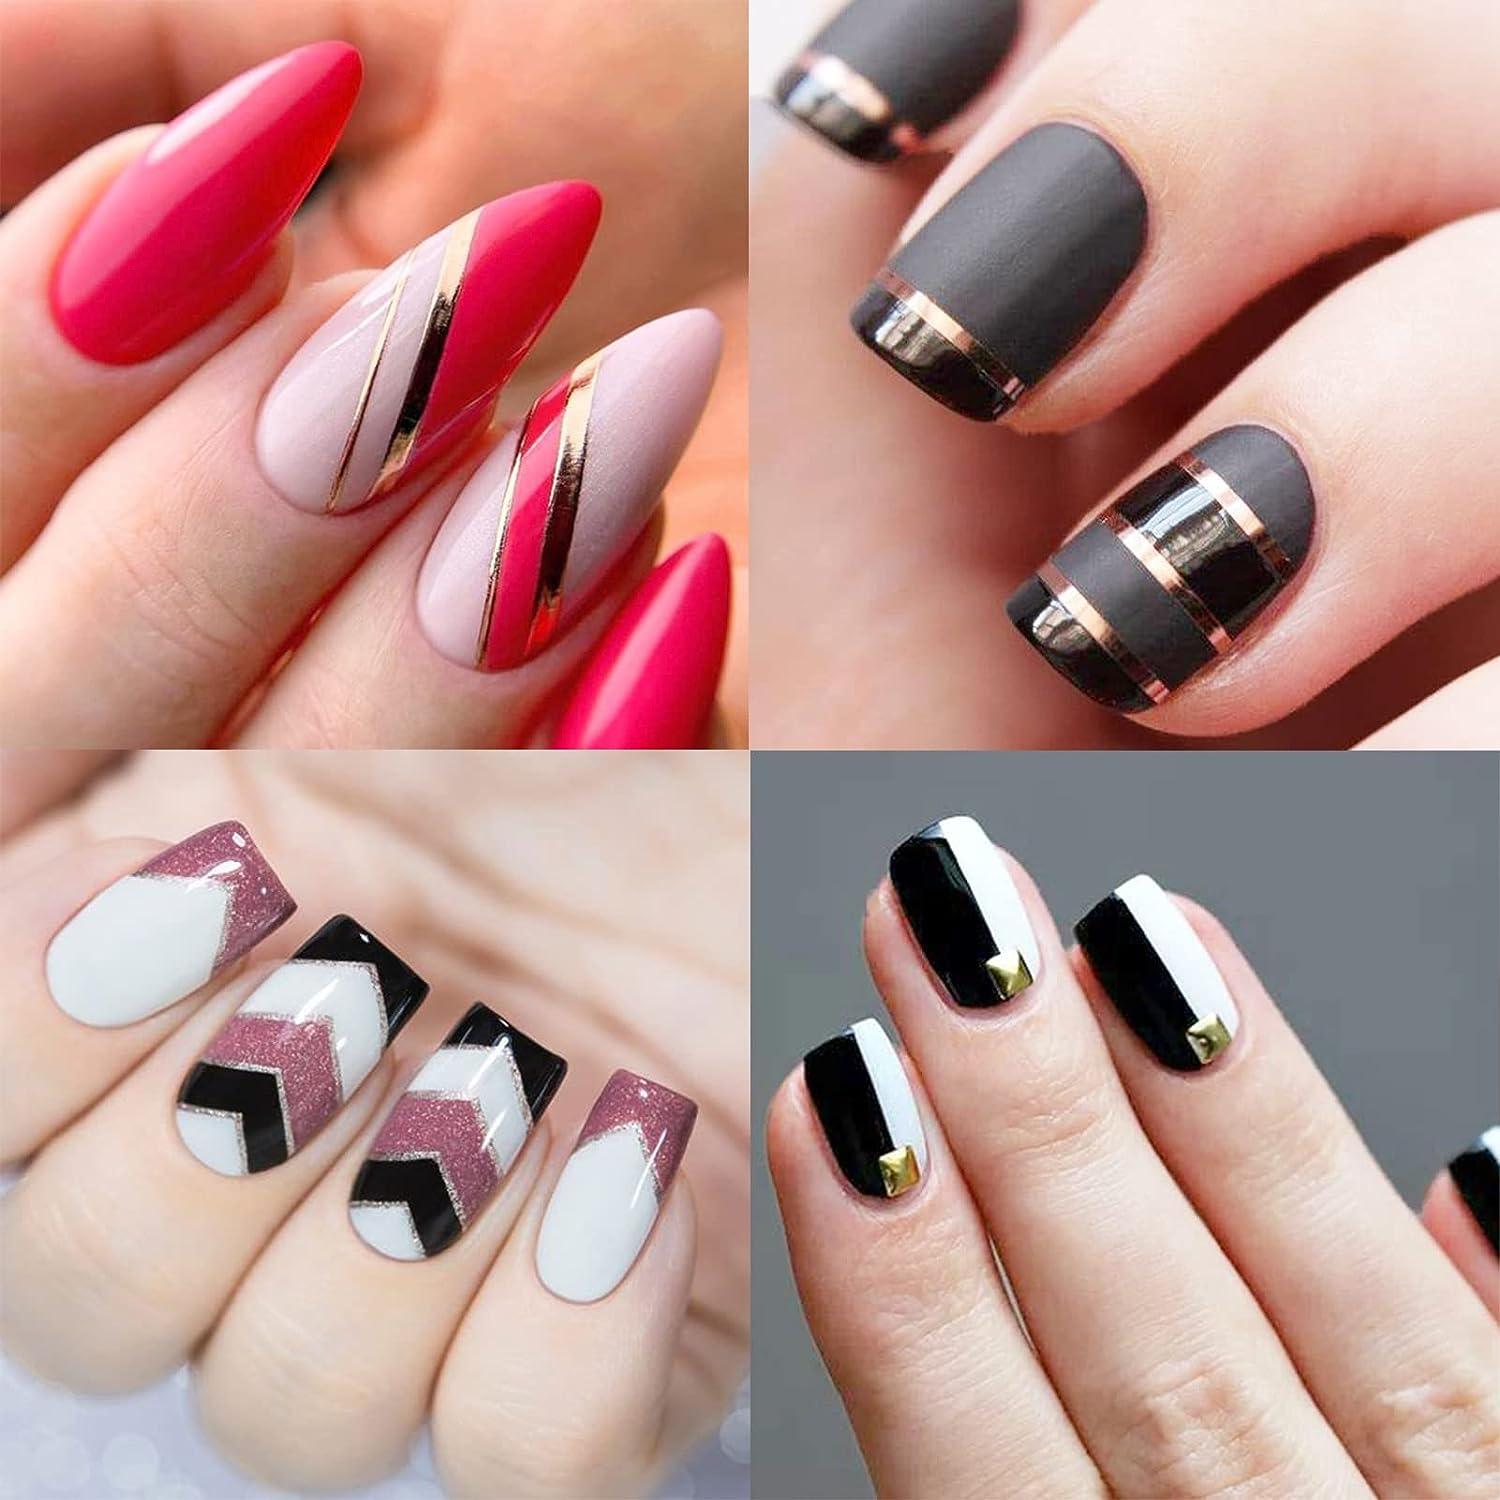 1422 Pcs French Tip Nail Guides Self-Adhesive French Moon Shaped V-Shaped  Manicure Strip Stickers for Edge Auxiliary Black DIY Decoration Stencil  Tools(11 Designs 36 Sheets) French Manicure 36 Sheets